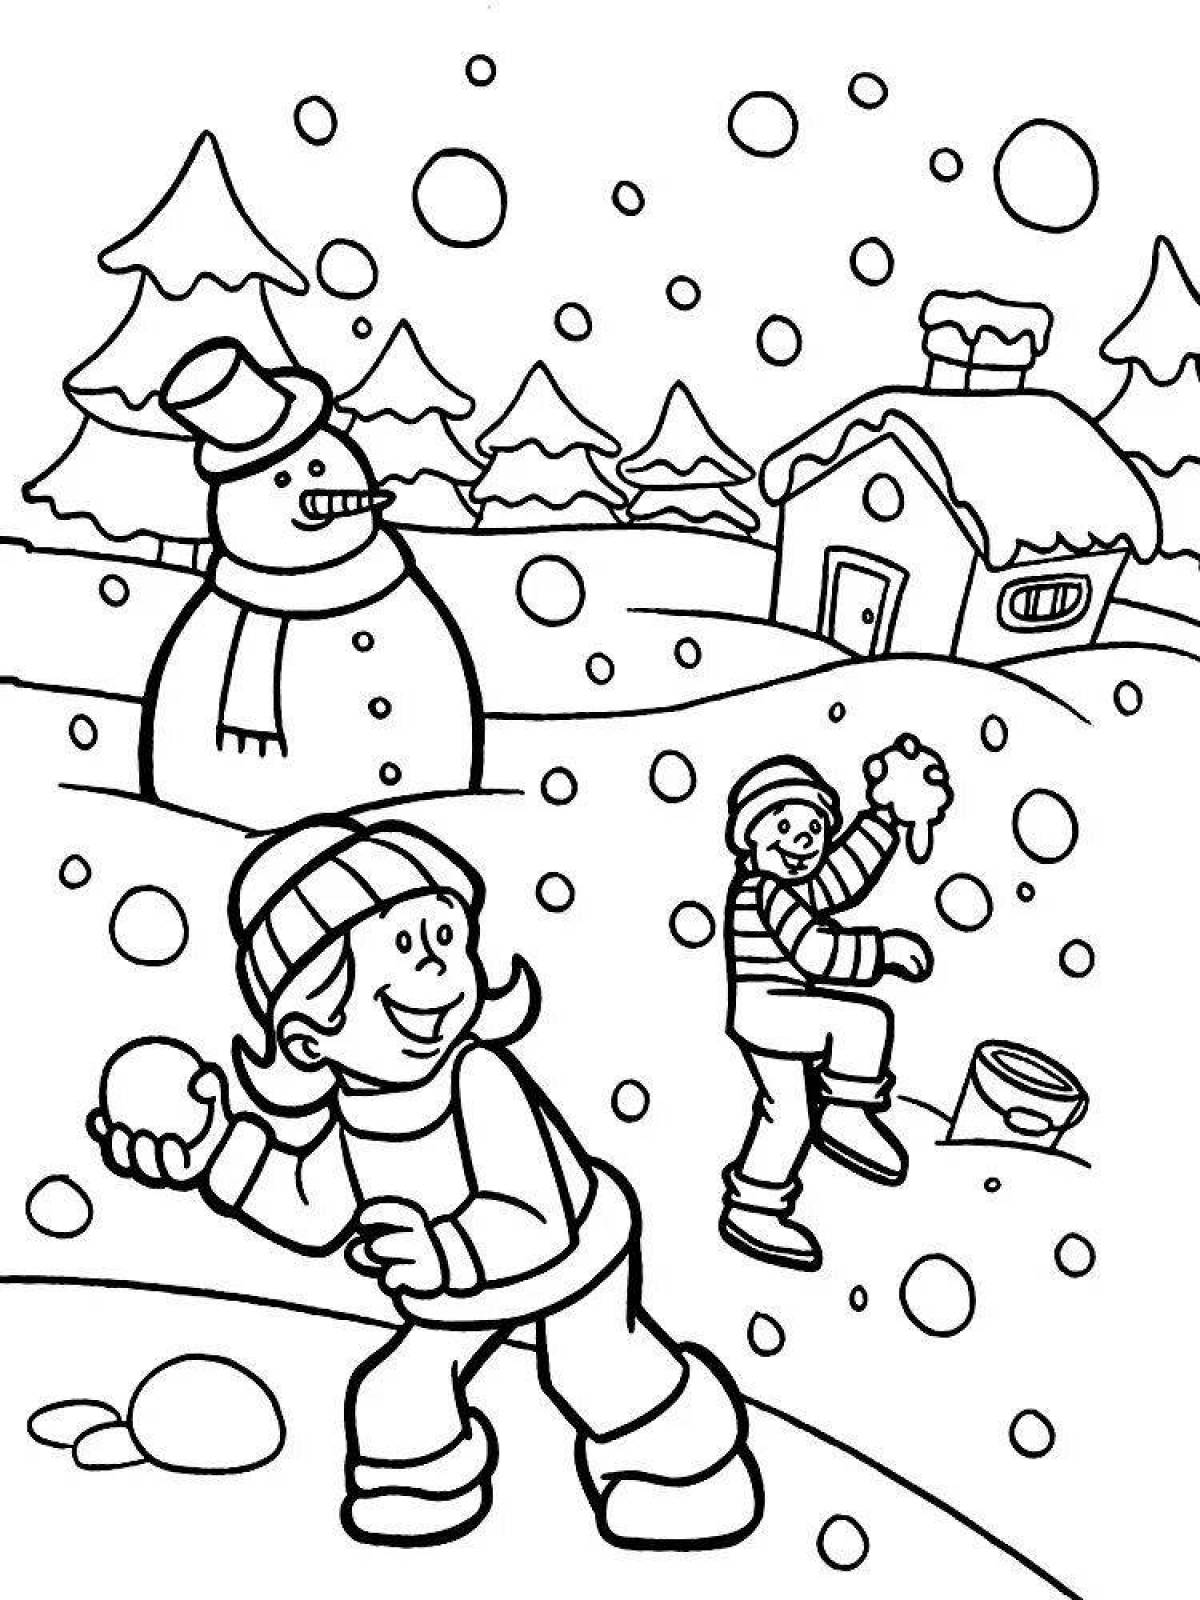 Winter for children 8 years old #5